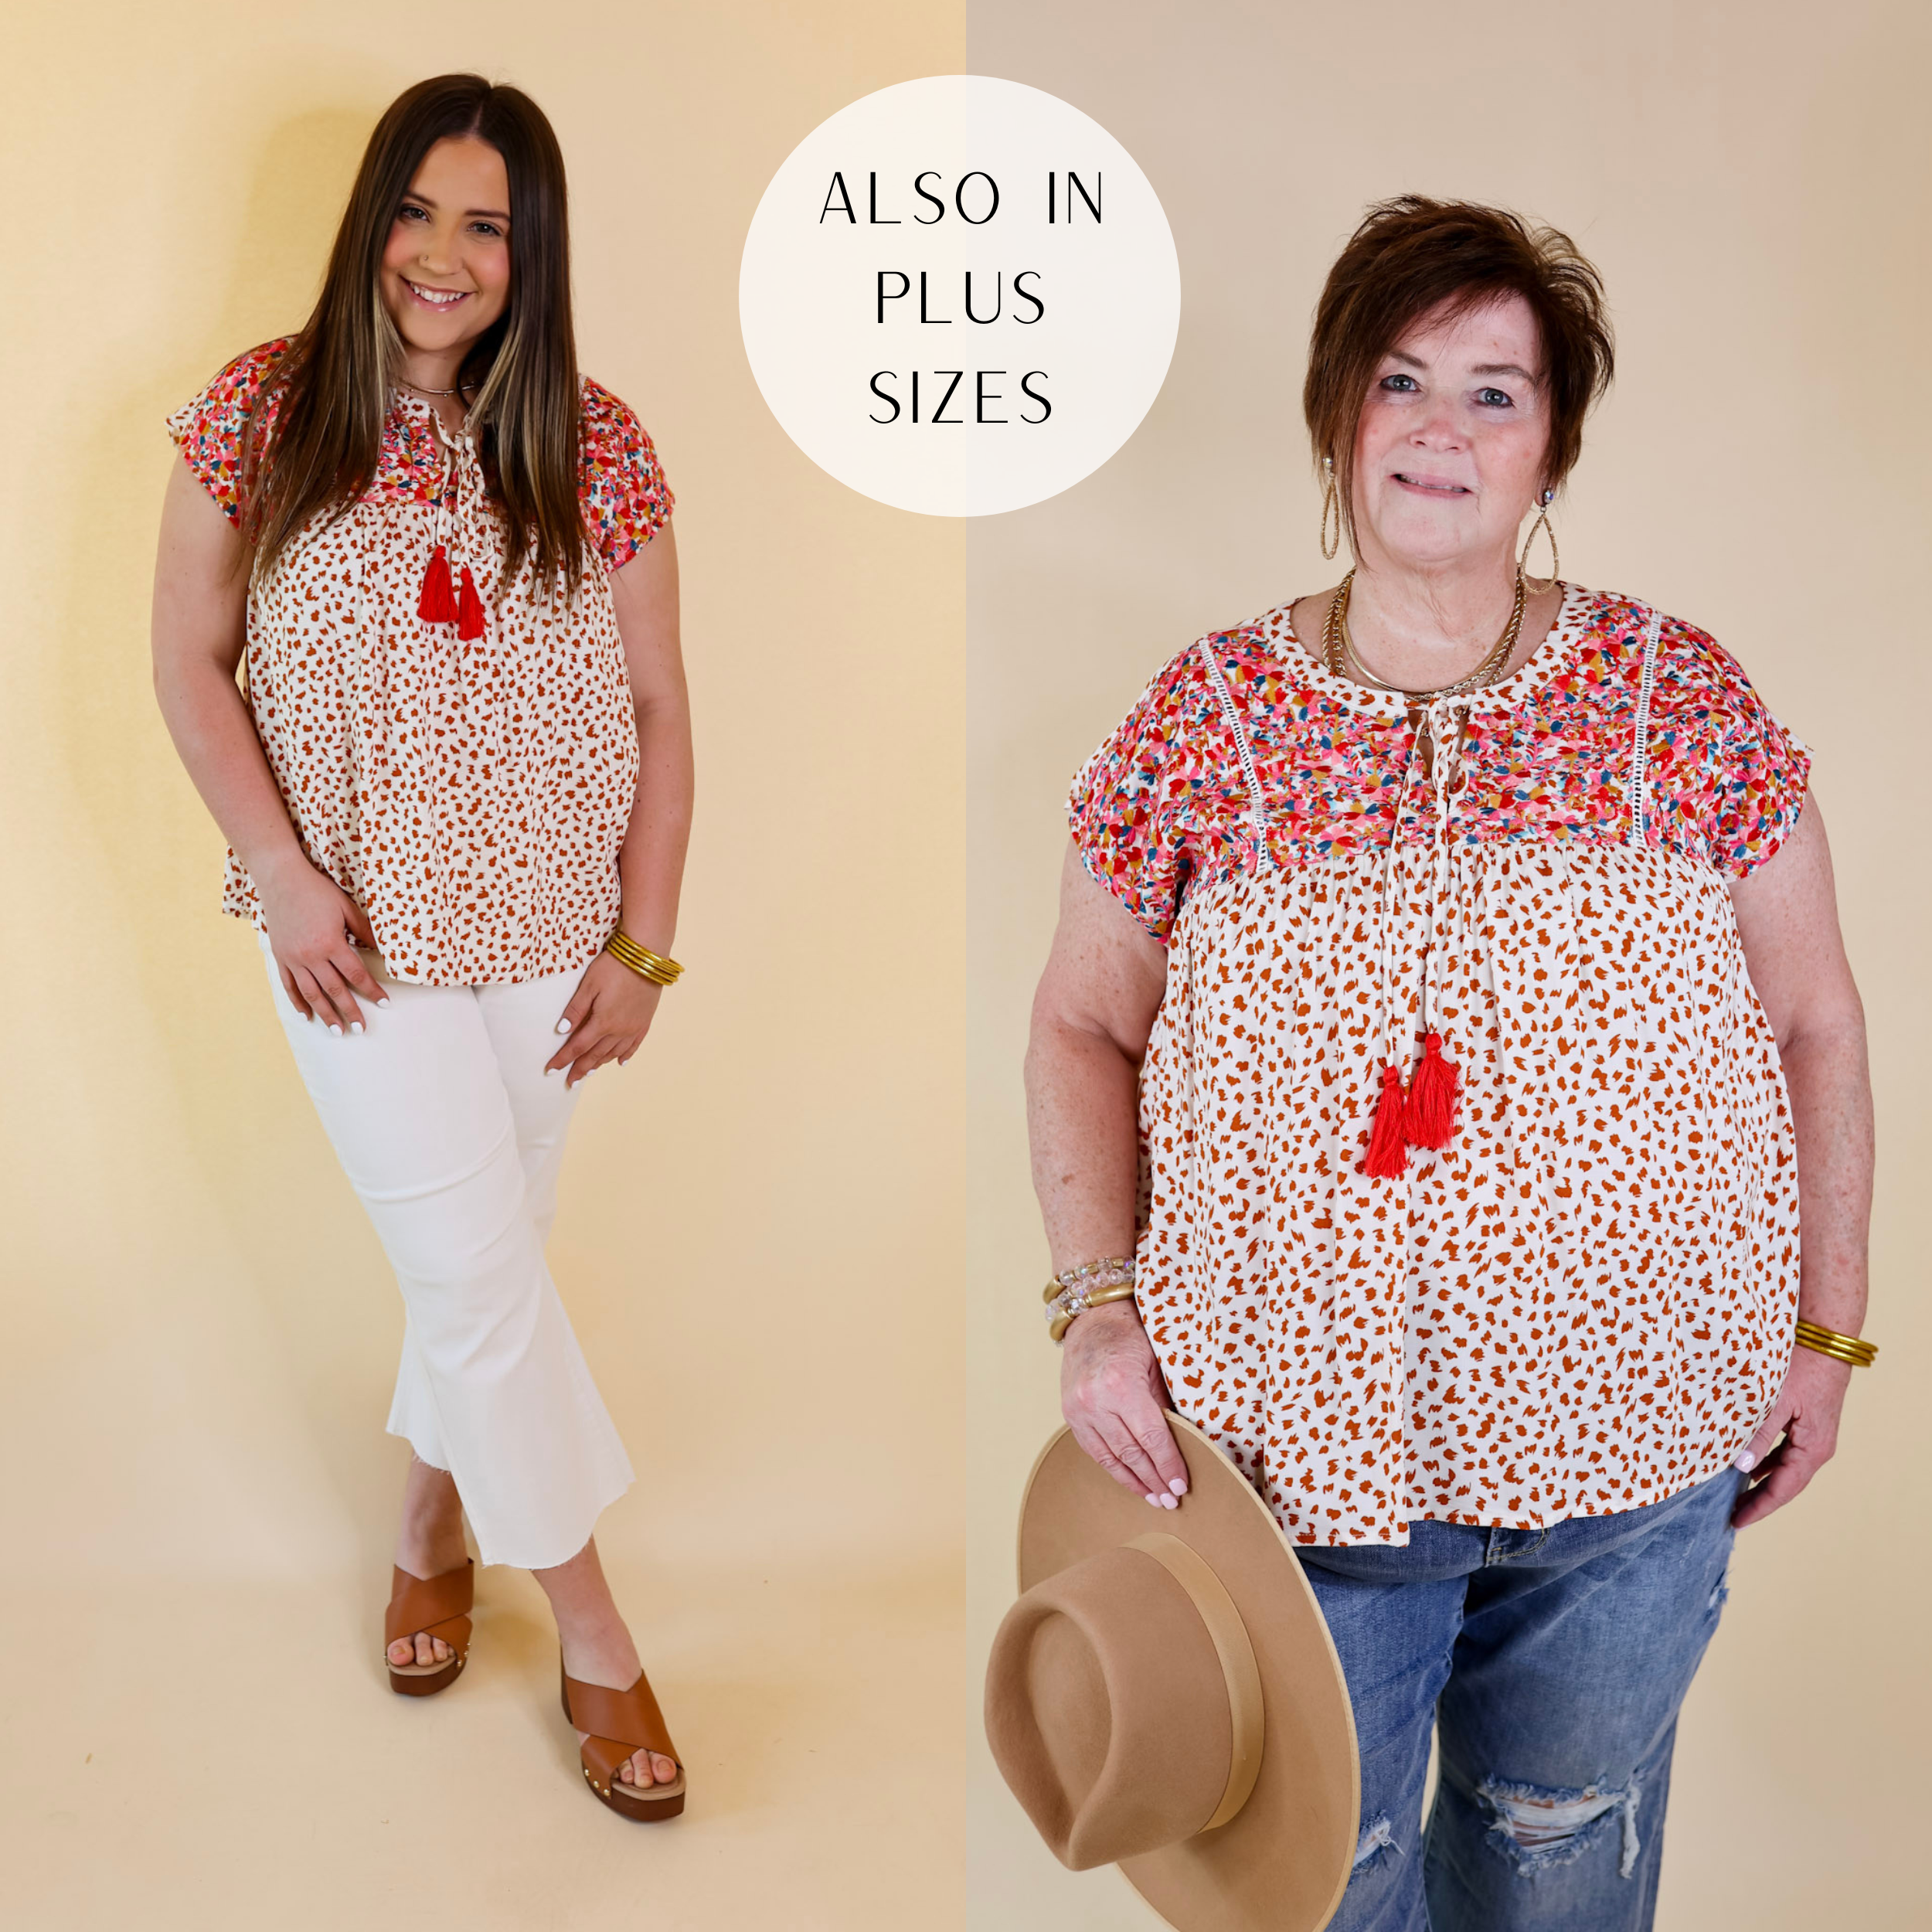 Fredericksburg In the Spring Embroidered Dotted Print Top with Front Keyhole in Ivory - Giddy Up Glamour Boutique